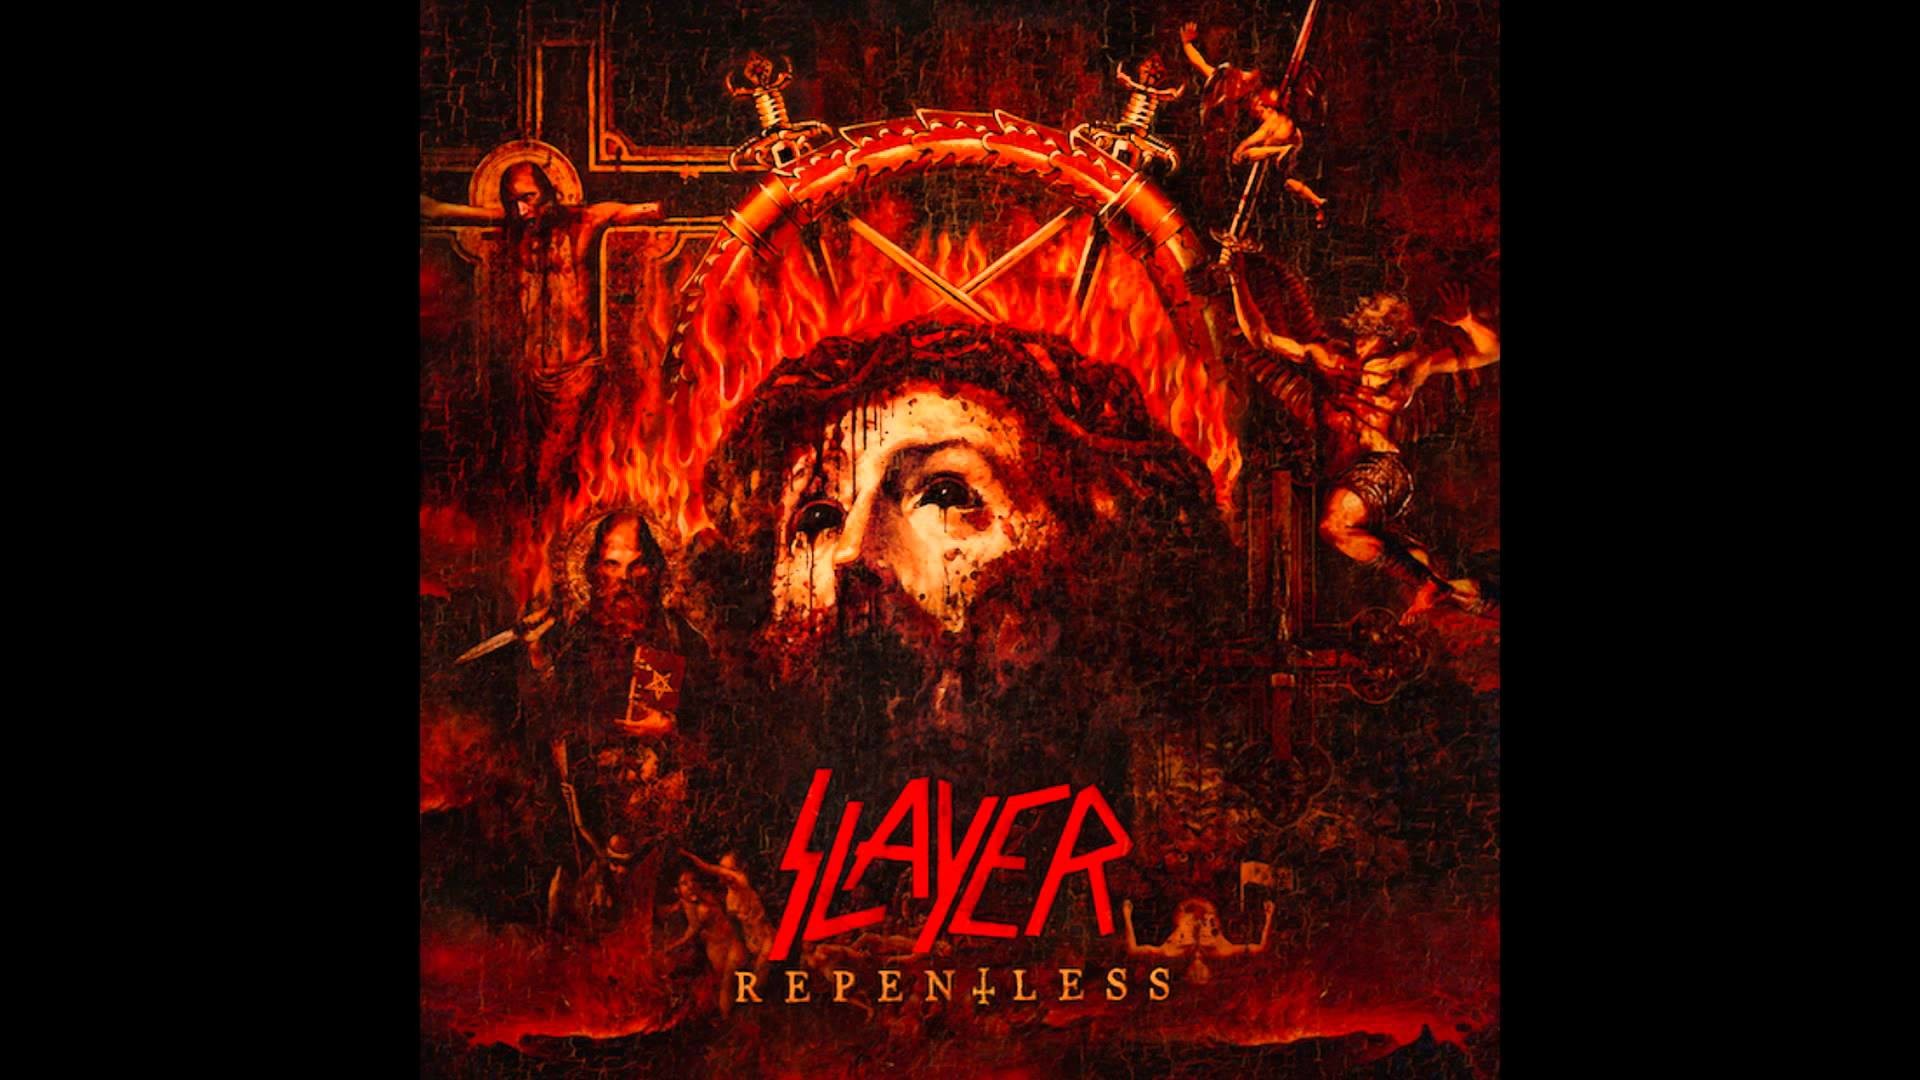 Repentless [hd Audio] New Song - Slayer Repentless Cover Hd - HD Wallpaper 